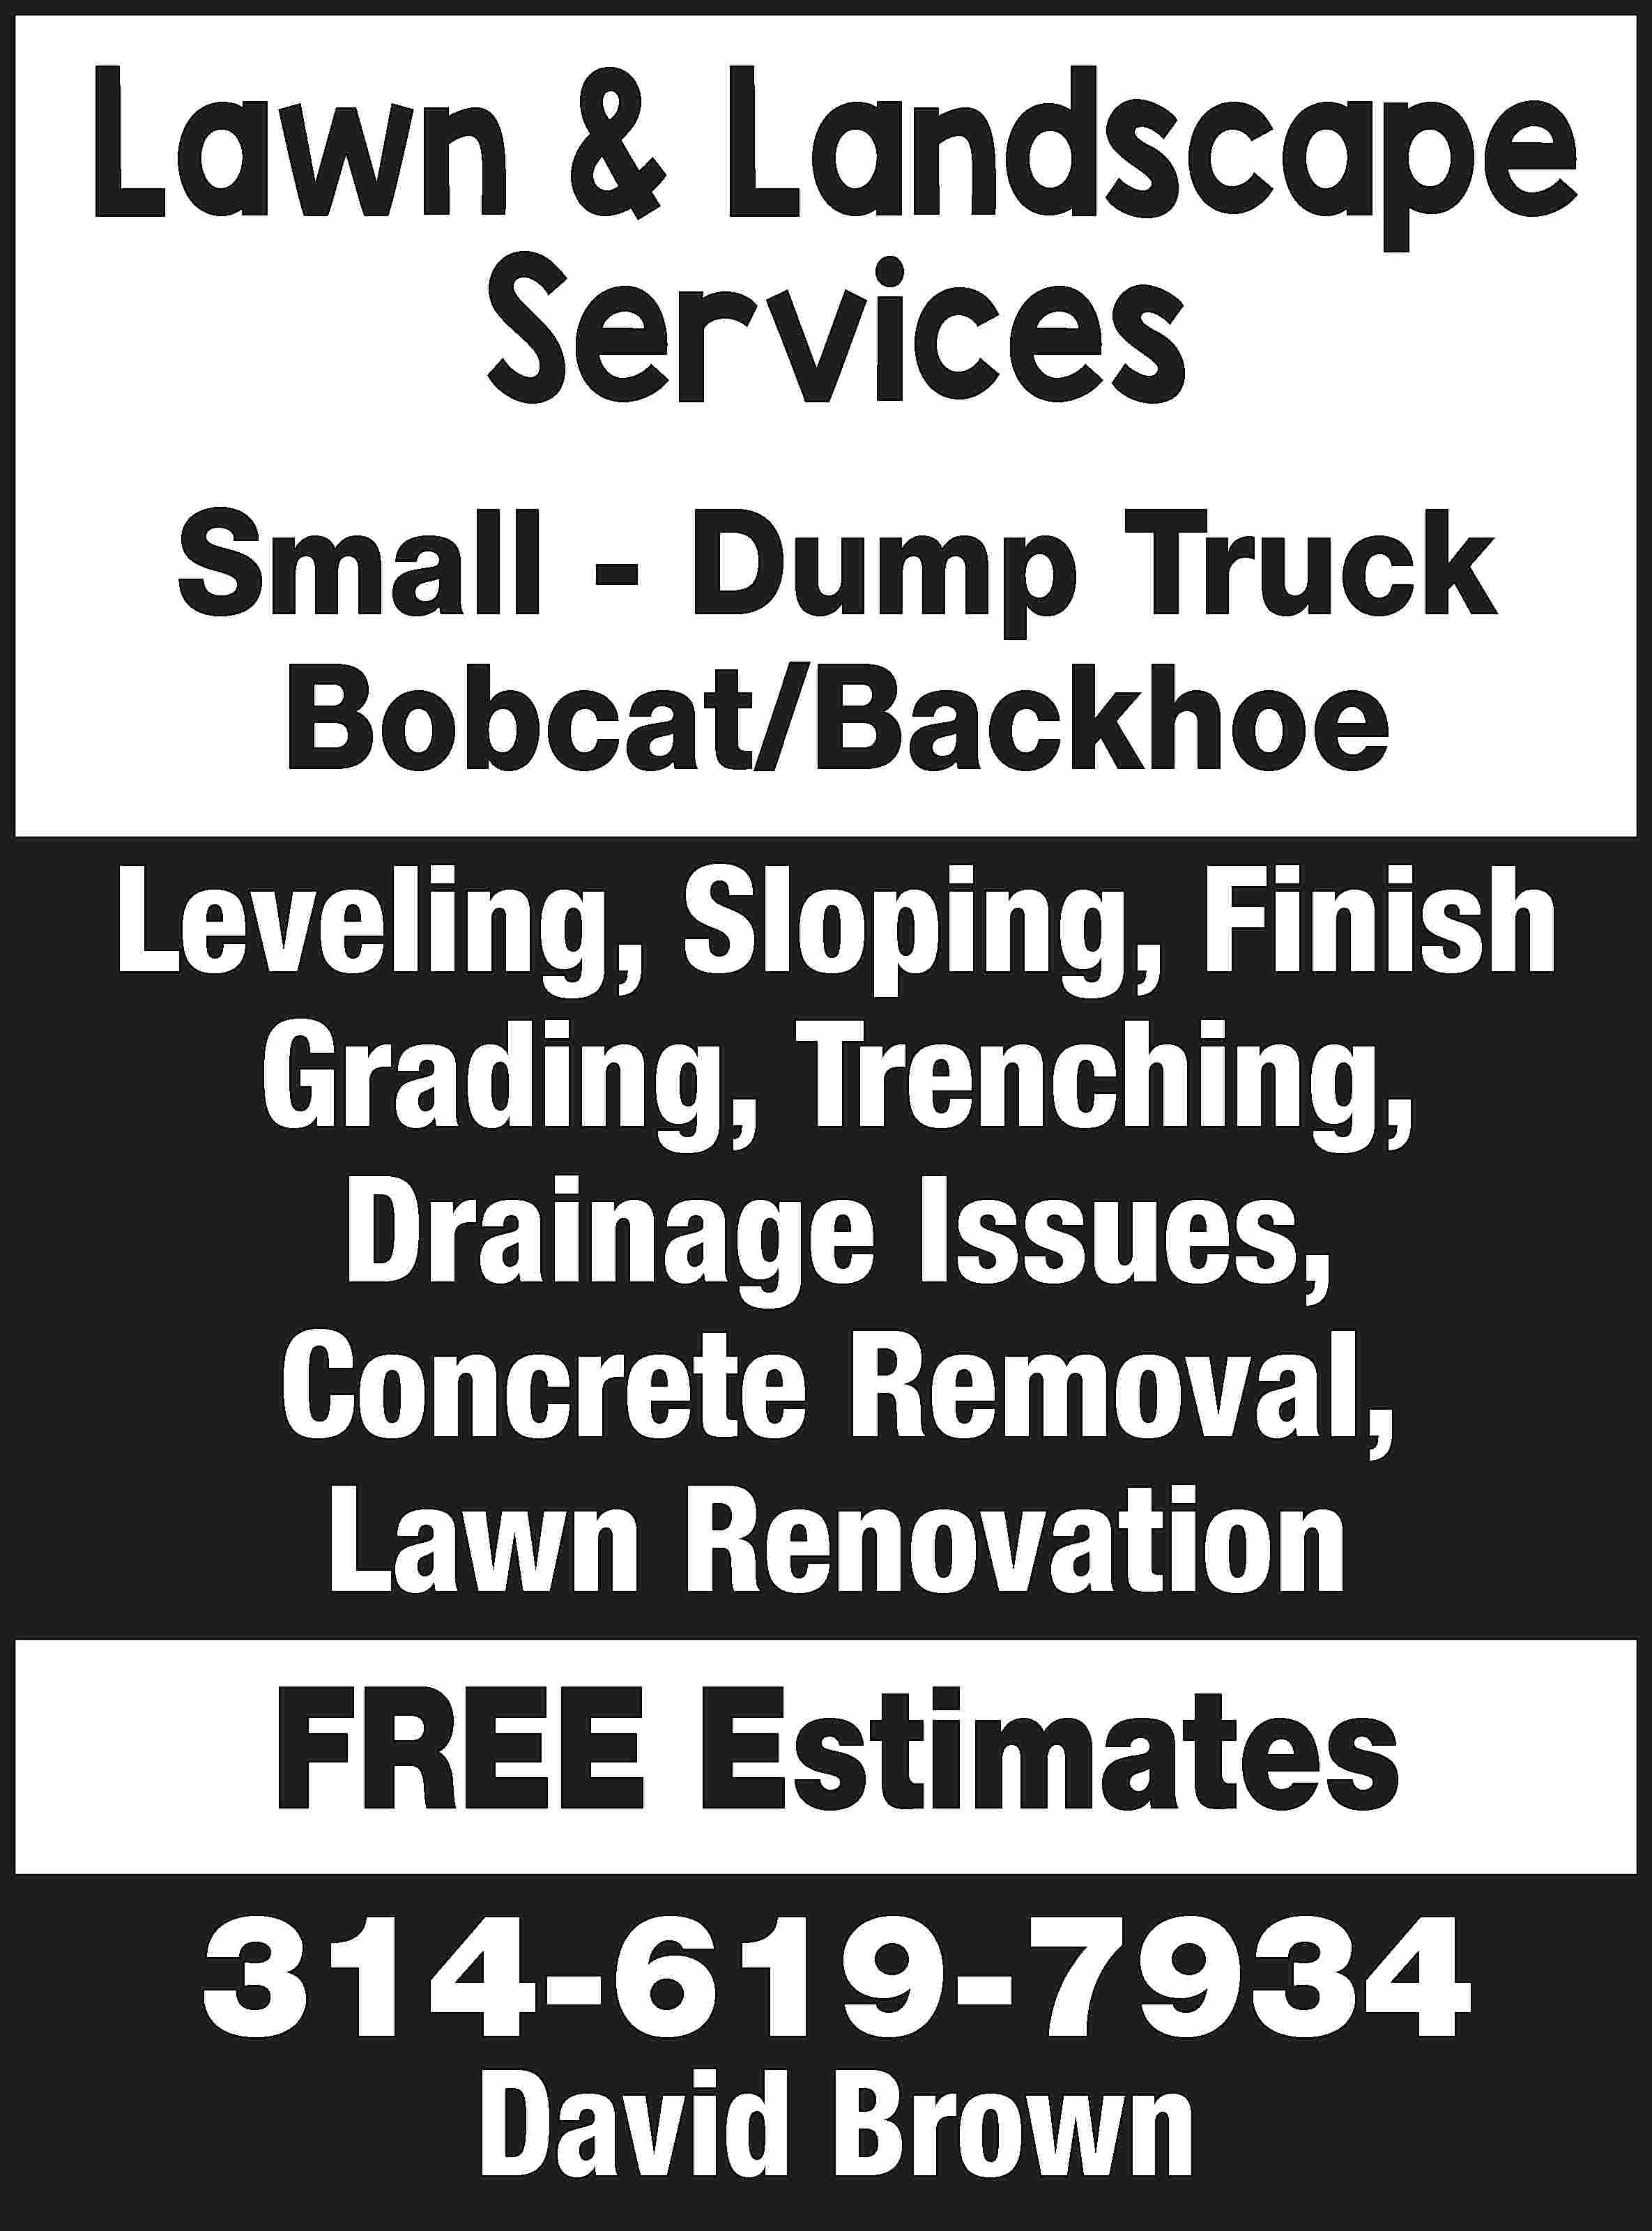 Lawn & Landscape Services Small  Lawn & Landscape Services Small - Dump Truck Bobcat/Backhoe Leveling, Sloping, Finish Grading, Trenching, Drainage Issues, Concrete Removal, Lawn Renovation FREE Estimates 314-619-7934 David Brown